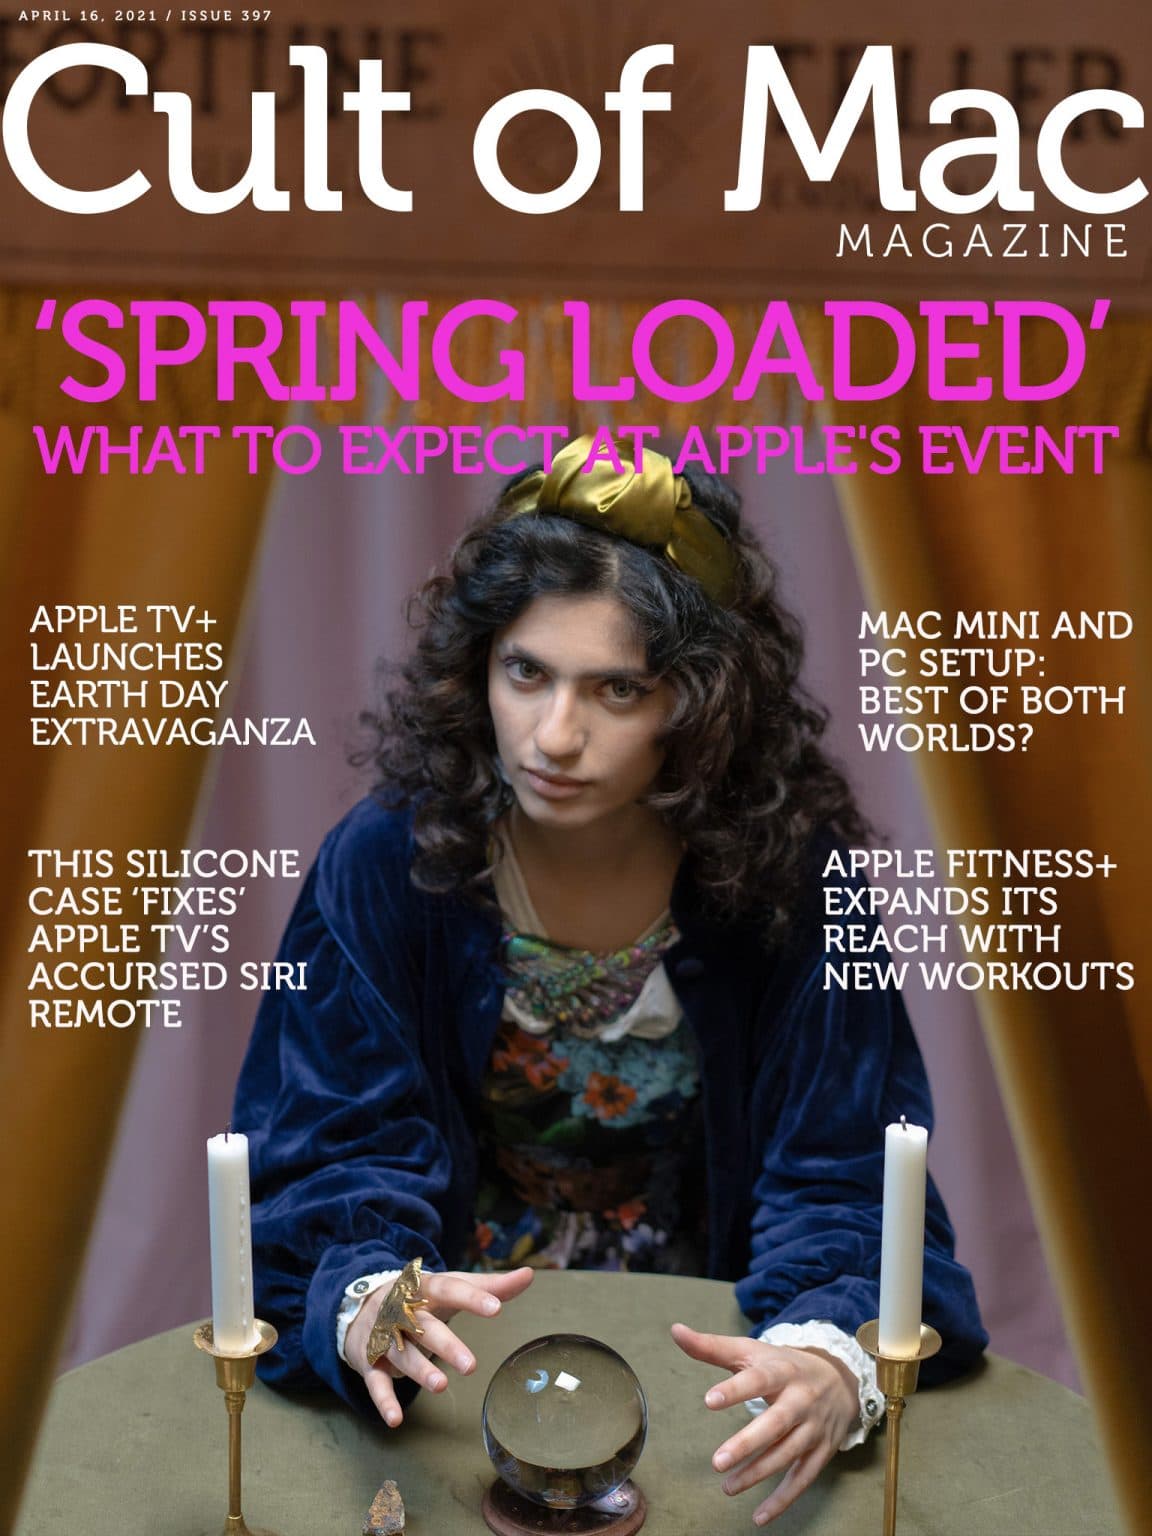 Apple Spring Loaded event predictions: Let's bust out the crystal ball.